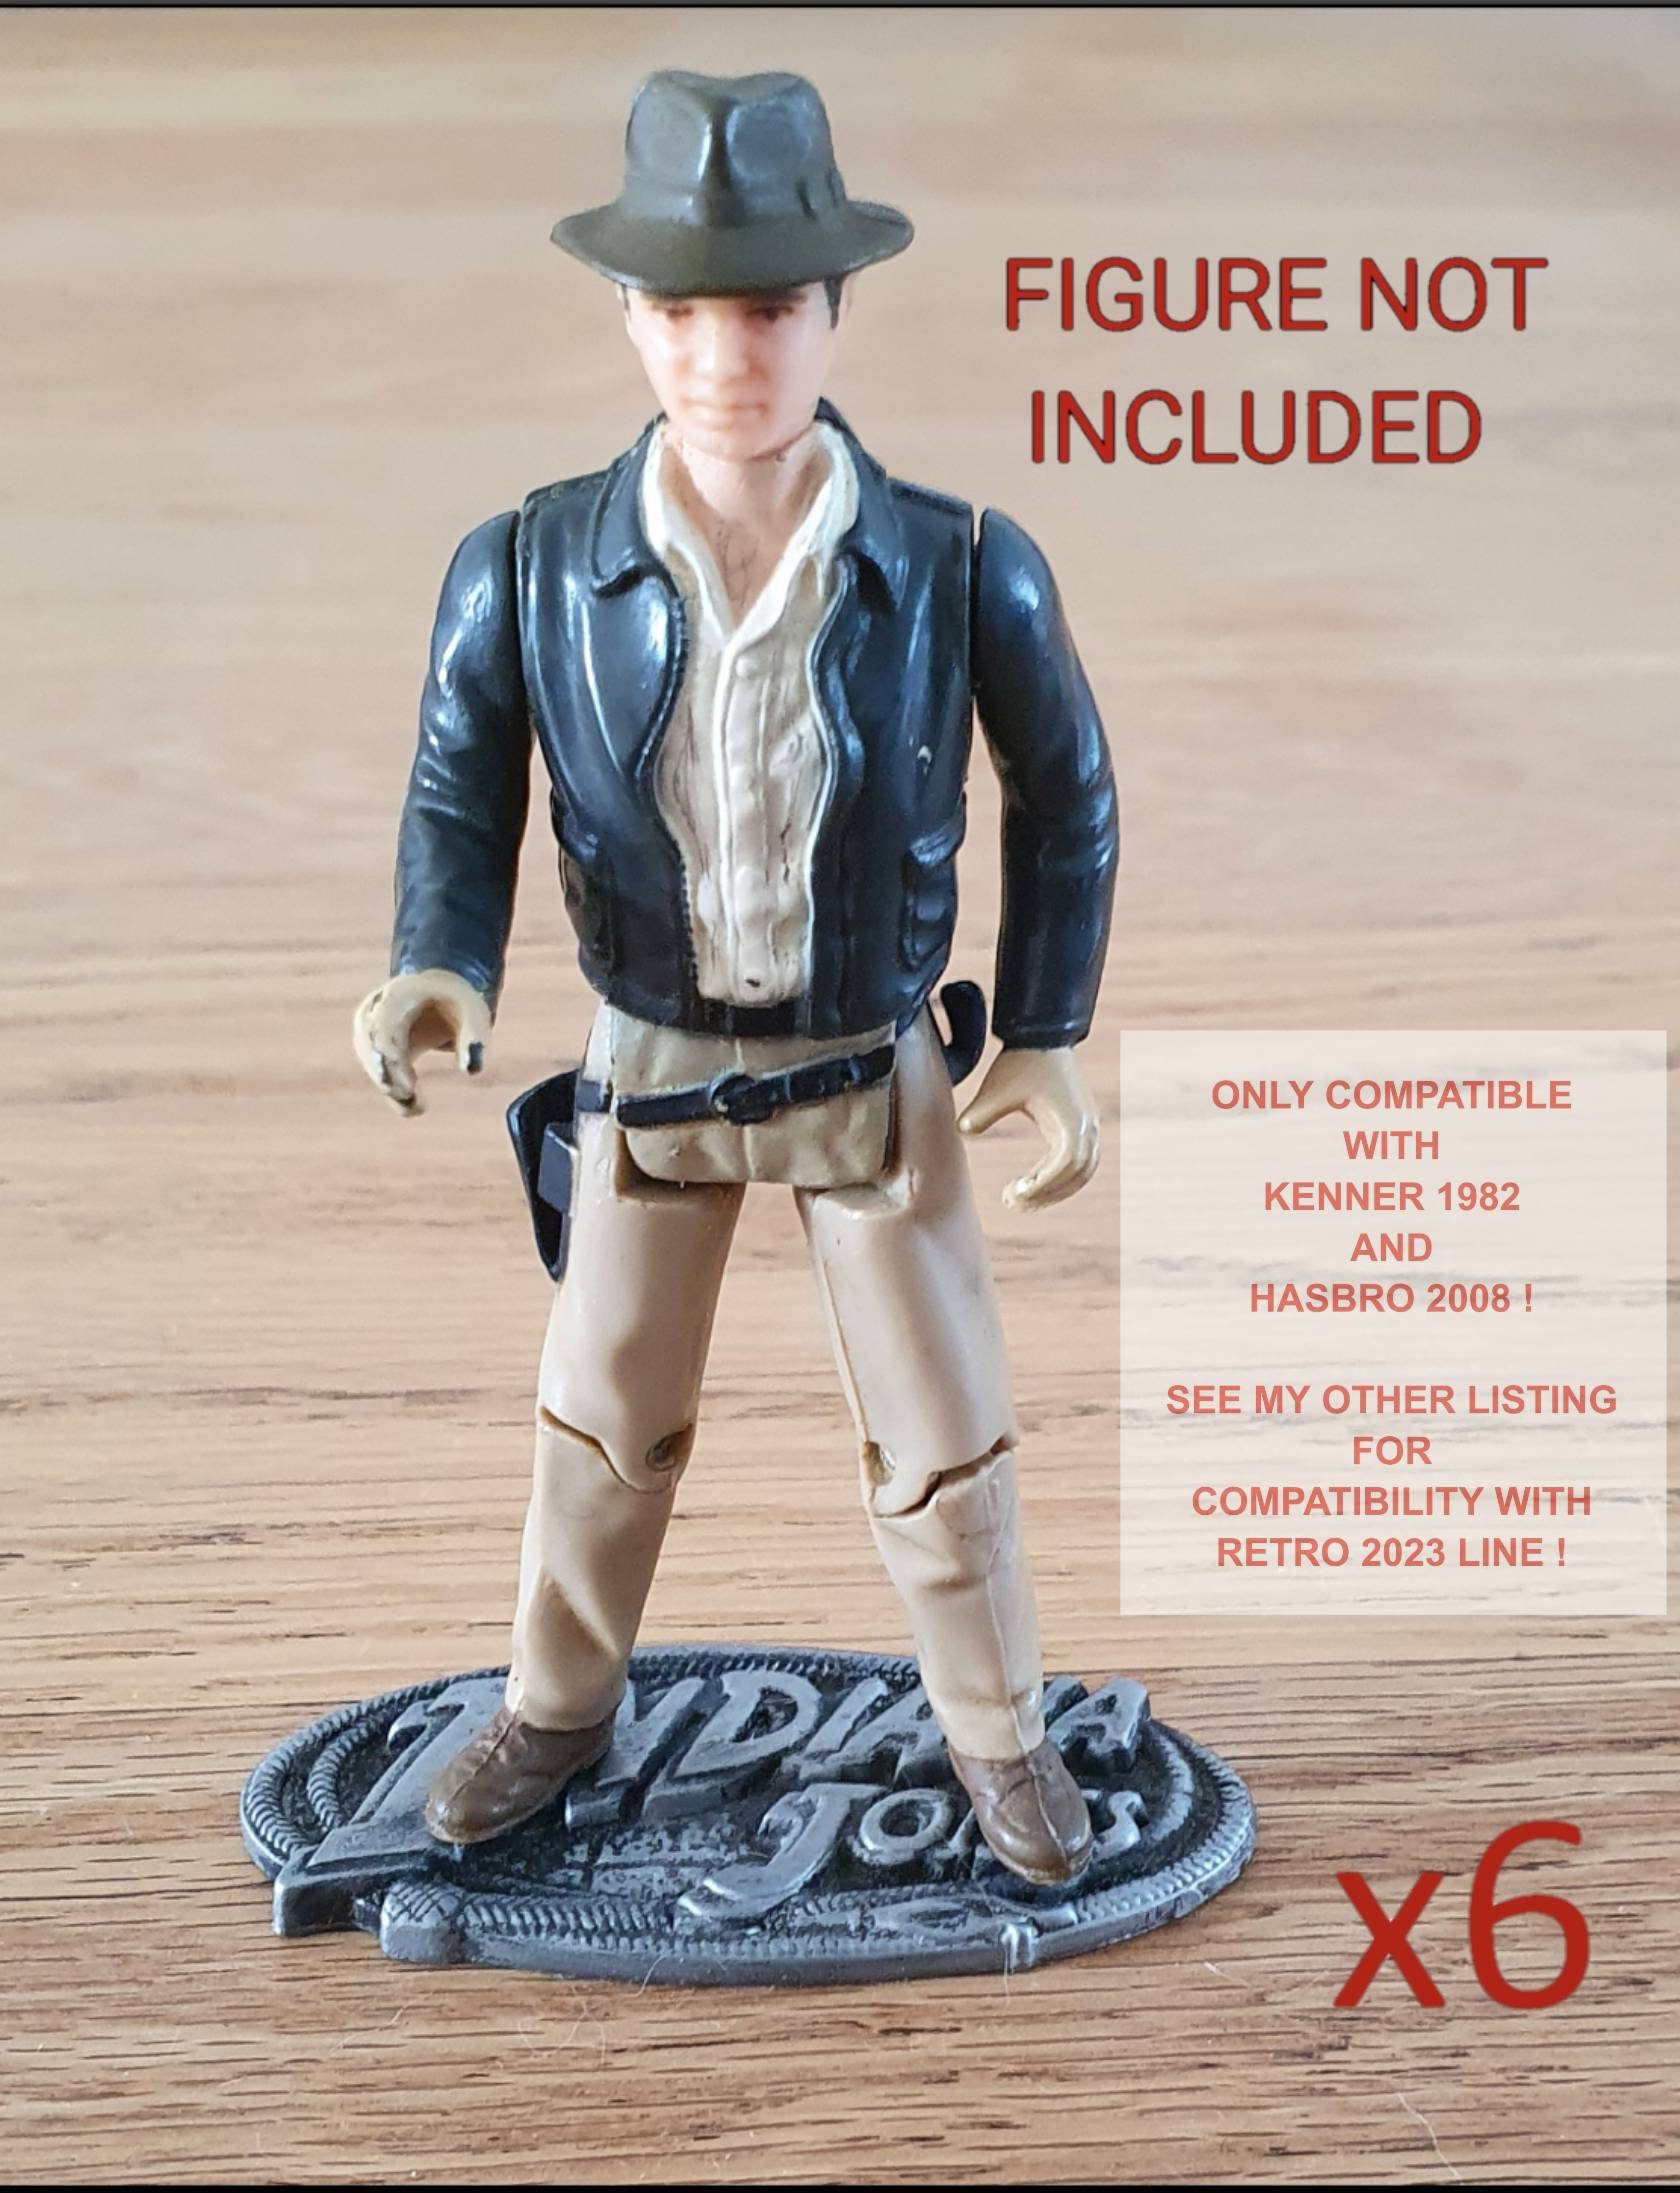 Hot Spot Collectibles and Toys - 2008 Last Crusade Indiana Jones Figure  3.75 Loose